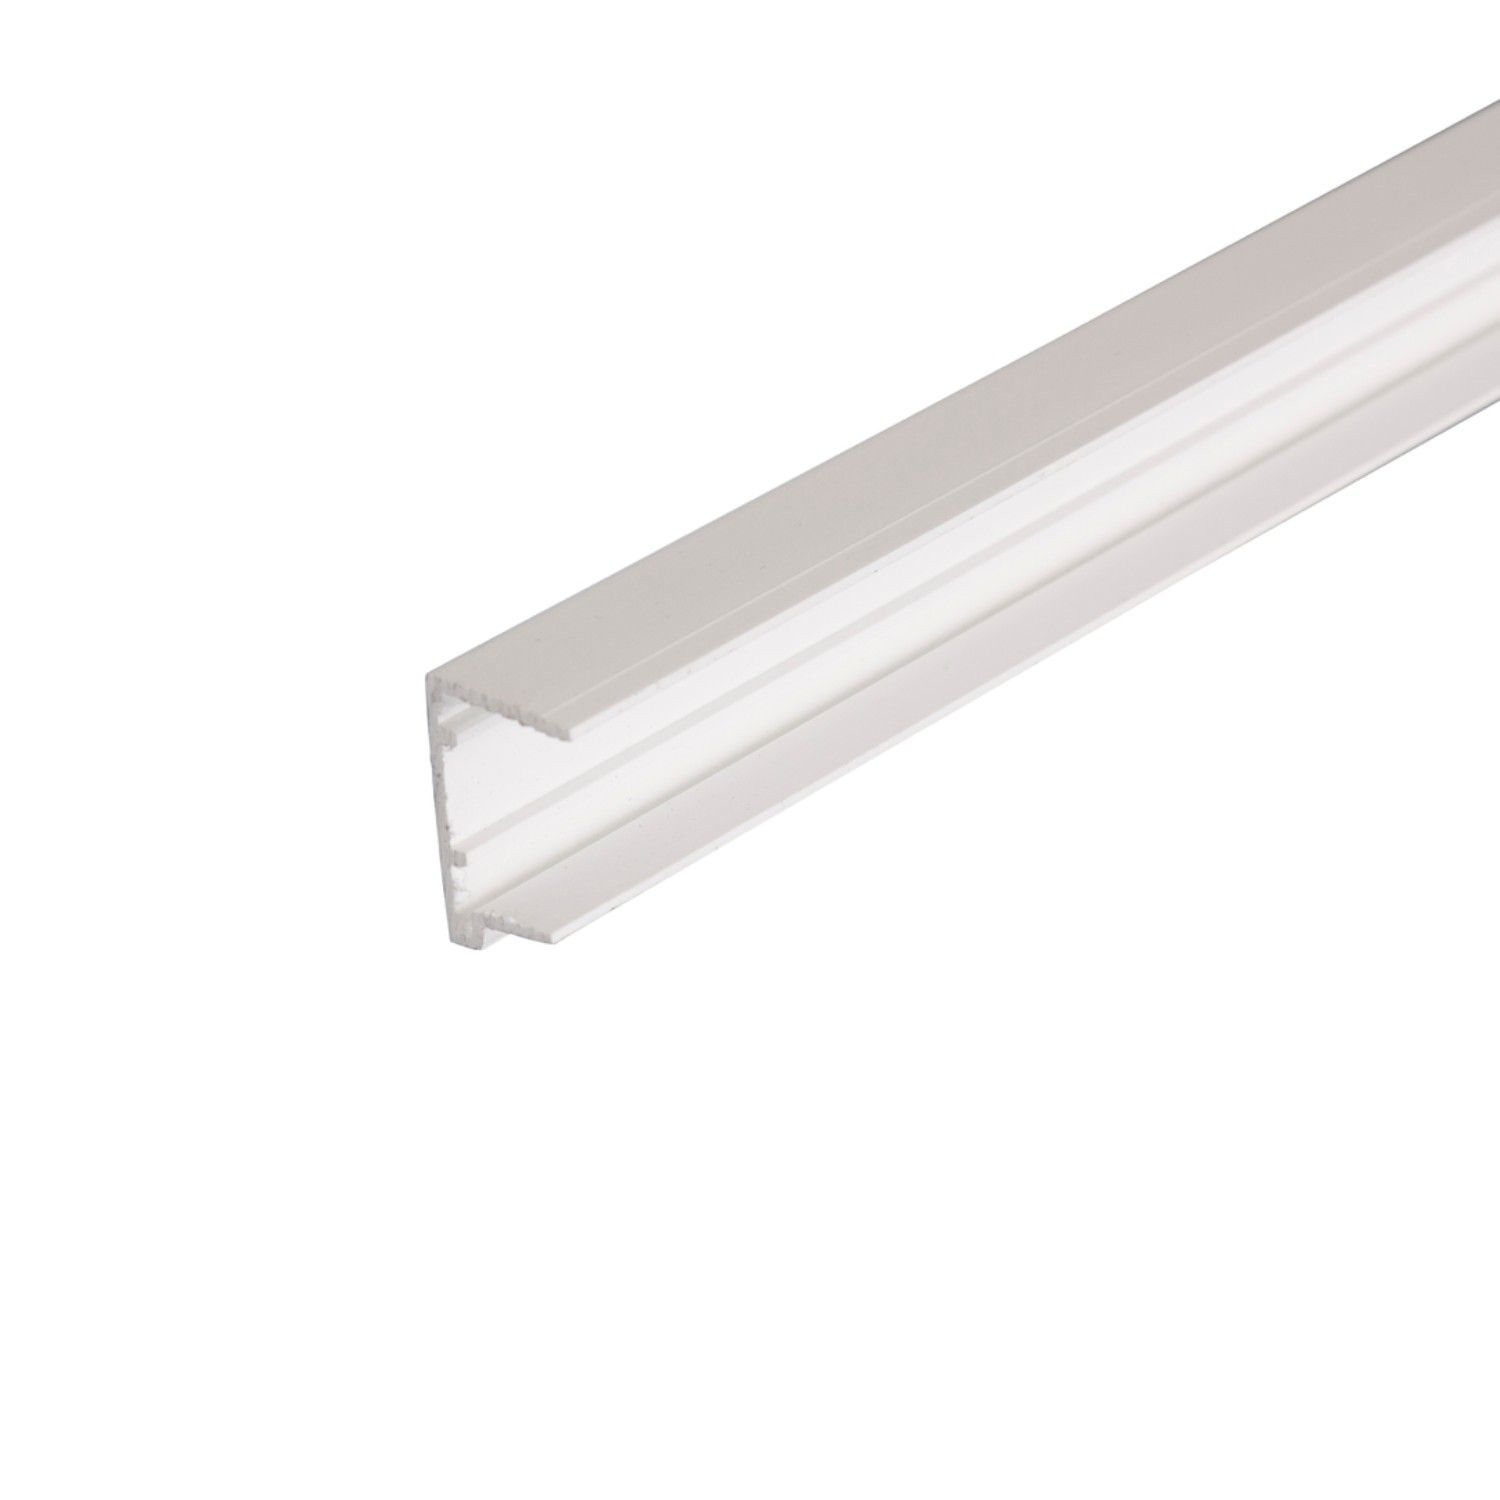 Corotherm - 25mm Polycarbonate Sheet End Cap - White (3500mm)